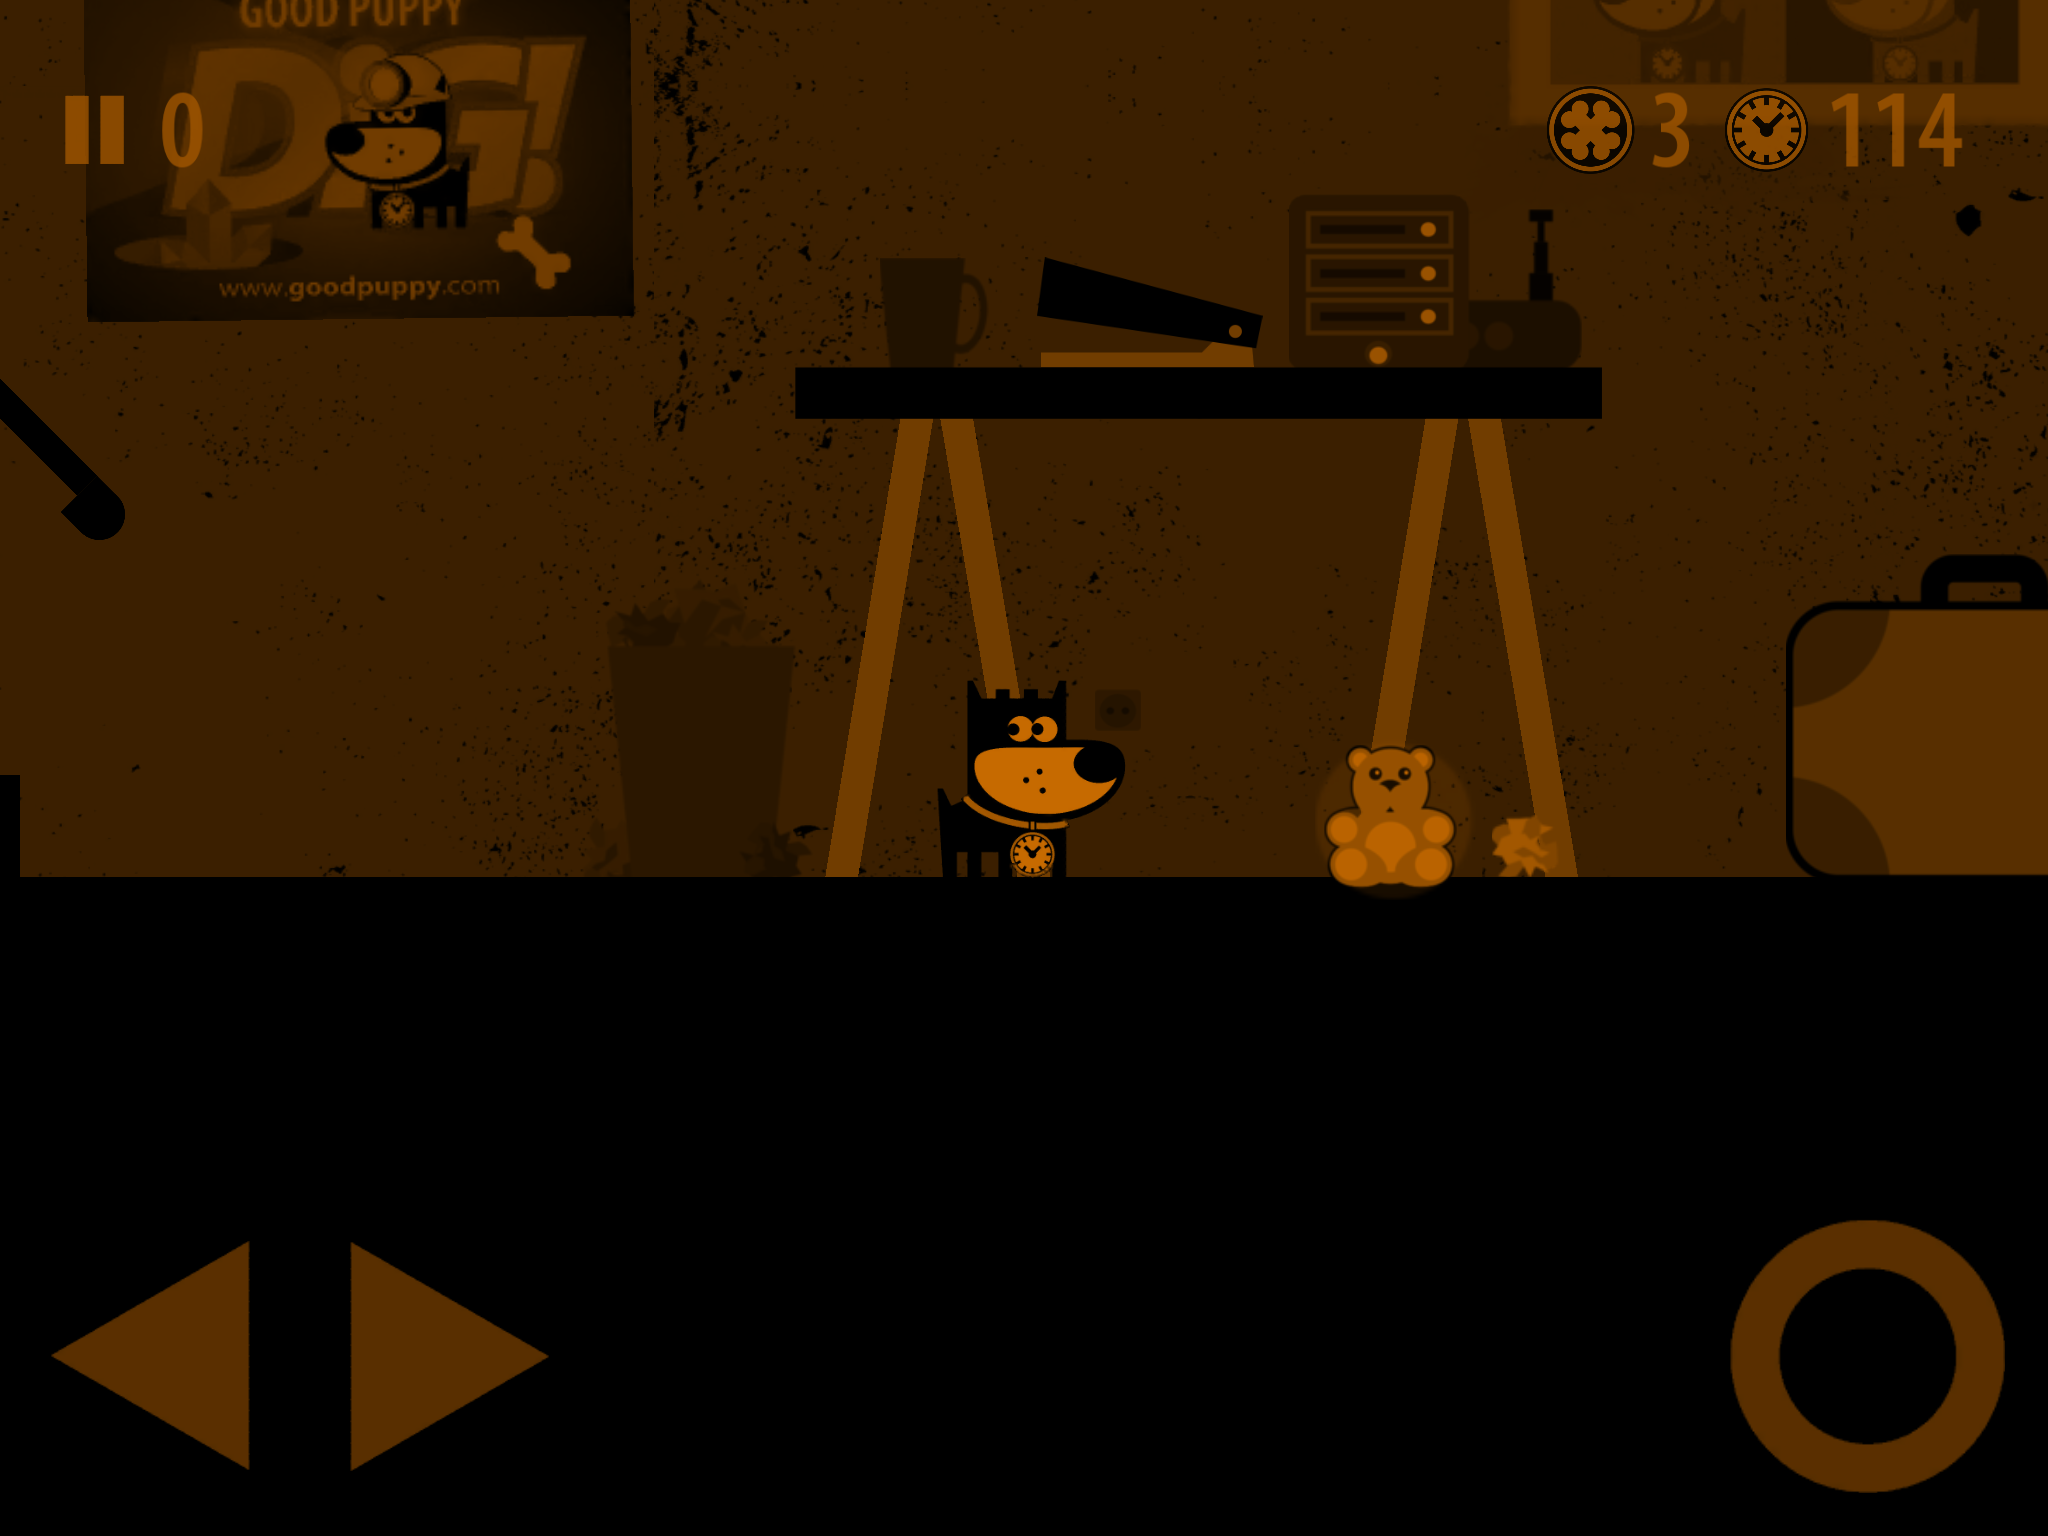 Retro-Platform-Action-Adventure-Game-GOOD-PUPPY-CLUELESS-3-Free-Download.PNG